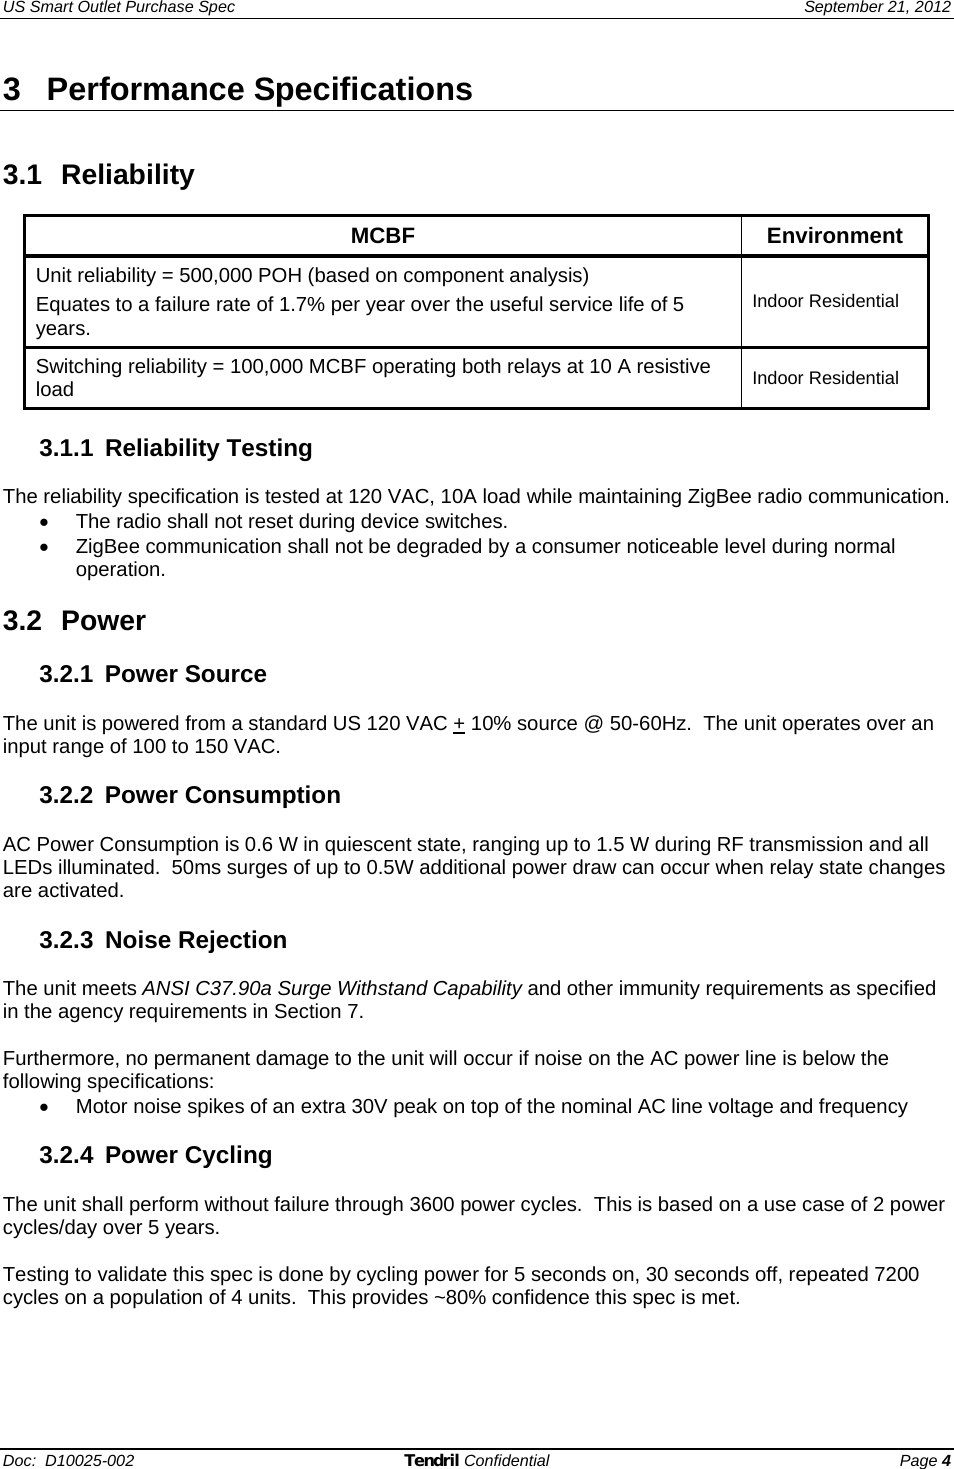 US Smart Outlet Purchase Spec   September 21, 2012 Doc:  D10025-002 Tendril Confidential Page 4 3 Performance Specifications   3.1 Reliability  MCBF Environment Unit reliability = 500,000 POH (based on component analysis) Equates to a failure rate of 1.7% per year over the useful service life of 5 years. Indoor Residential Switching reliability = 100,000 MCBF operating both relays at 10 A resistive load  Indoor Residential  3.1.1 Reliability Testing  The reliability specification is tested at 120 VAC, 10A load while maintaining ZigBee radio communication.   •  The radio shall not reset during device switches. •  ZigBee communication shall not be degraded by a consumer noticeable level during normal operation.  3.2 Power  3.2.1 Power Source  The unit is powered from a standard US 120 VAC + 10% source @ 50-60Hz.  The unit operates over an input range of 100 to 150 VAC.  3.2.2 Power Consumption  AC Power Consumption is 0.6 W in quiescent state, ranging up to 1.5 W during RF transmission and all LEDs illuminated.  50ms surges of up to 0.5W additional power draw can occur when relay state changes are activated.  3.2.3 Noise Rejection  The unit meets ANSI C37.90a Surge Withstand Capability and other immunity requirements as specified in the agency requirements in Section 7.  Furthermore, no permanent damage to the unit will occur if noise on the AC power line is below the following specifications: •  Motor noise spikes of an extra 30V peak on top of the nominal AC line voltage and frequency  3.2.4 Power Cycling  The unit shall perform without failure through 3600 power cycles.  This is based on a use case of 2 power cycles/day over 5 years.    Testing to validate this spec is done by cycling power for 5 seconds on, 30 seconds off, repeated 7200 cycles on a population of 4 units.  This provides ~80% confidence this spec is met.  